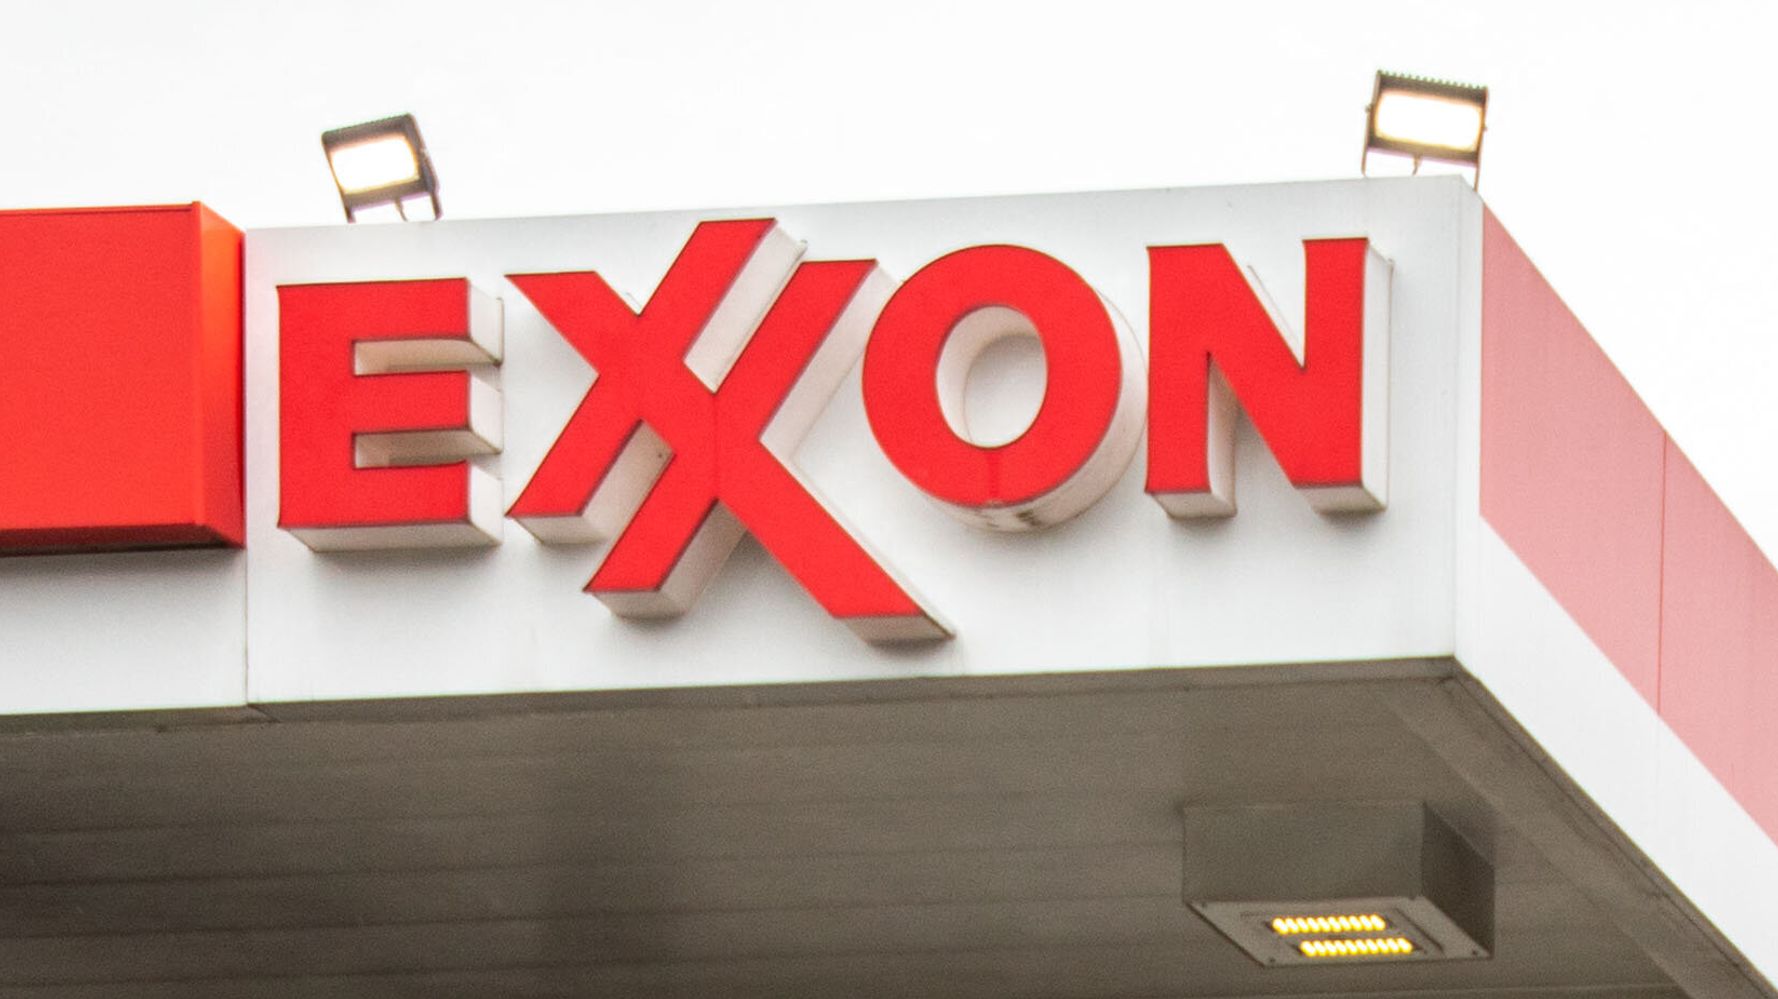 Climate Activists Get Renewed Victory After Third Member Elected To Exxon’s Board